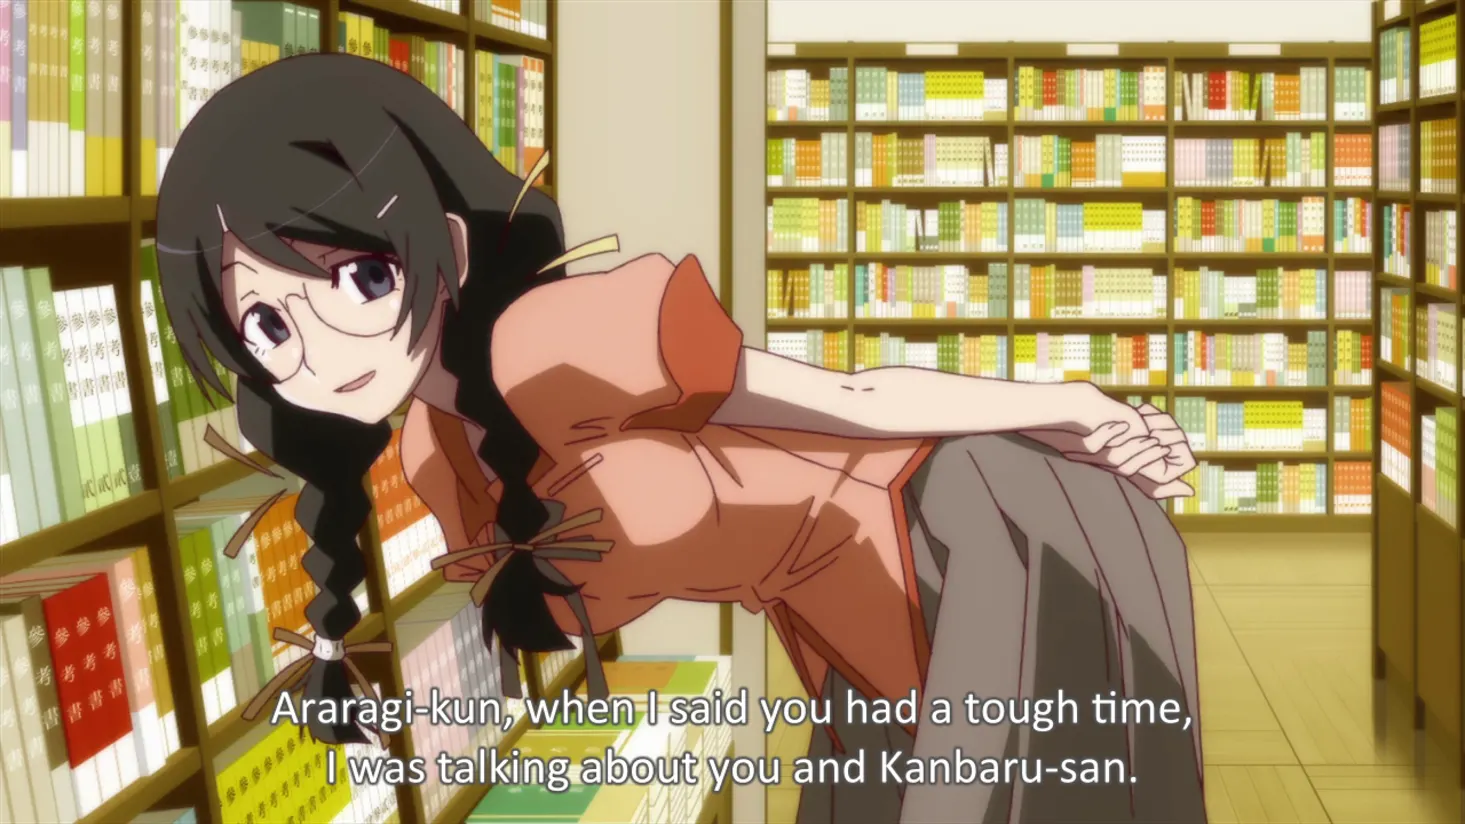 Never a story to miss a fetish, Bakemonogatari makes time for bookish Tsubasa to be objectified especially for all you librarian fantasists out there.